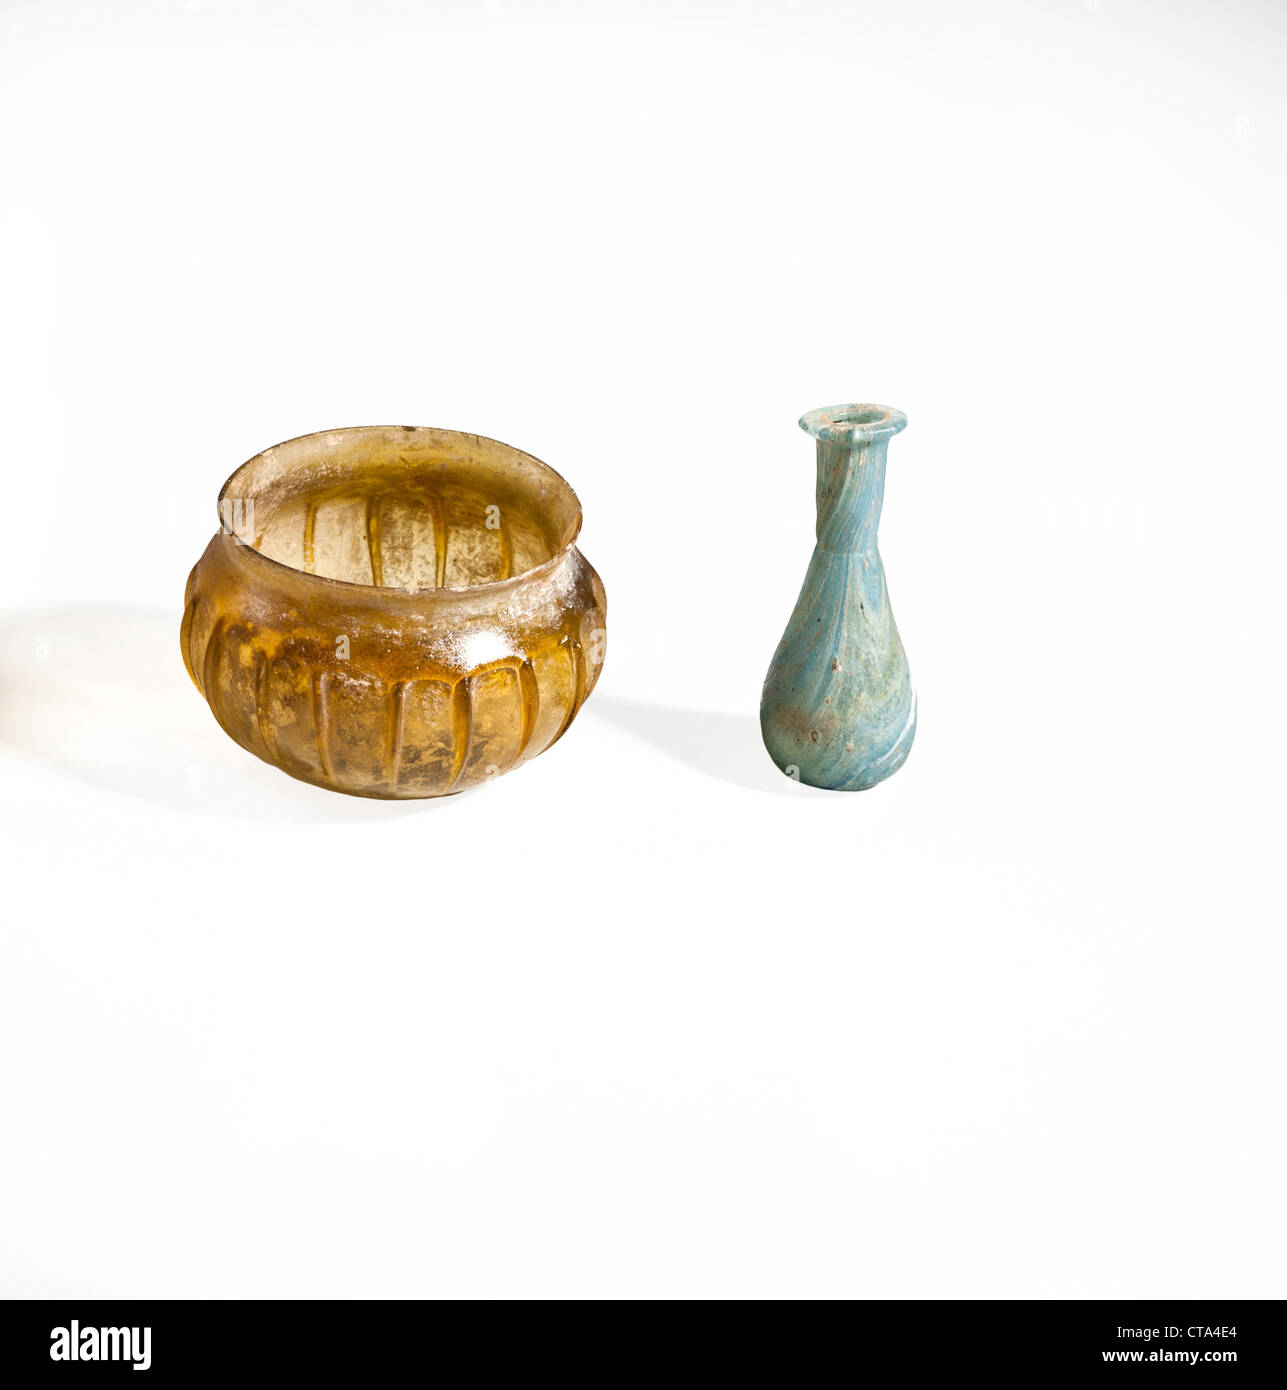 2 Roman glass containers one yellow one green first centuryBCE Stock Photo